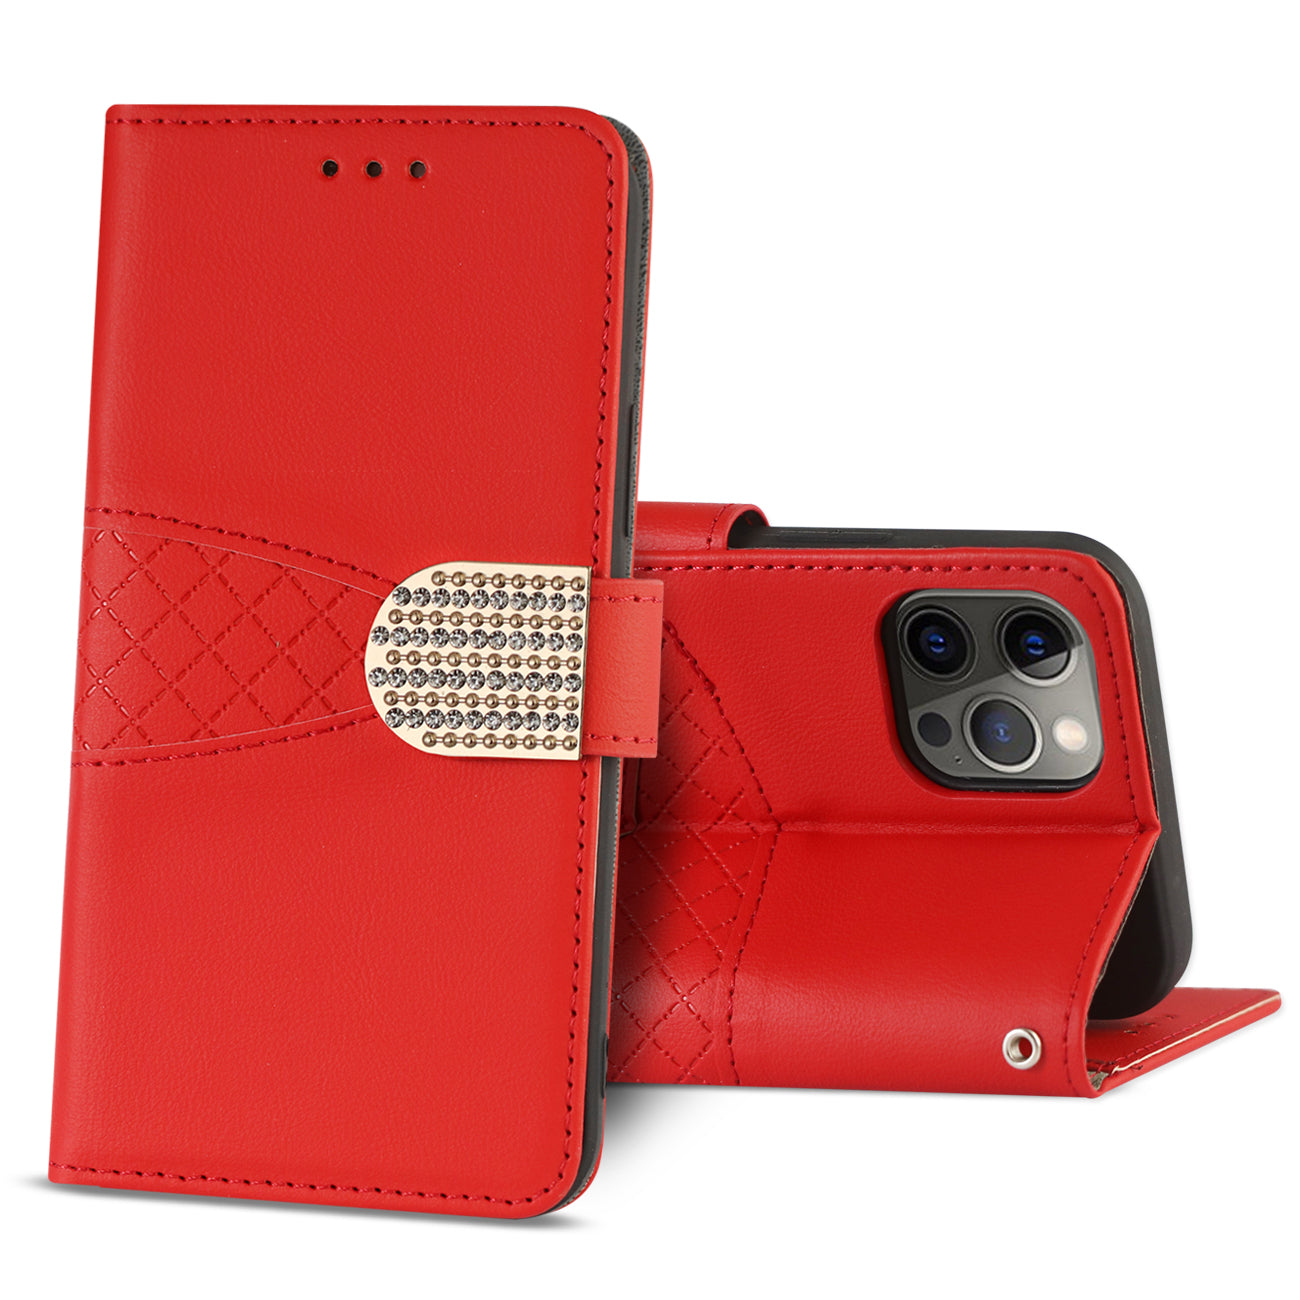 Reiko 3-In-1 Wallet Case for IPHONE 12/IPHONE 12 PRO In Red